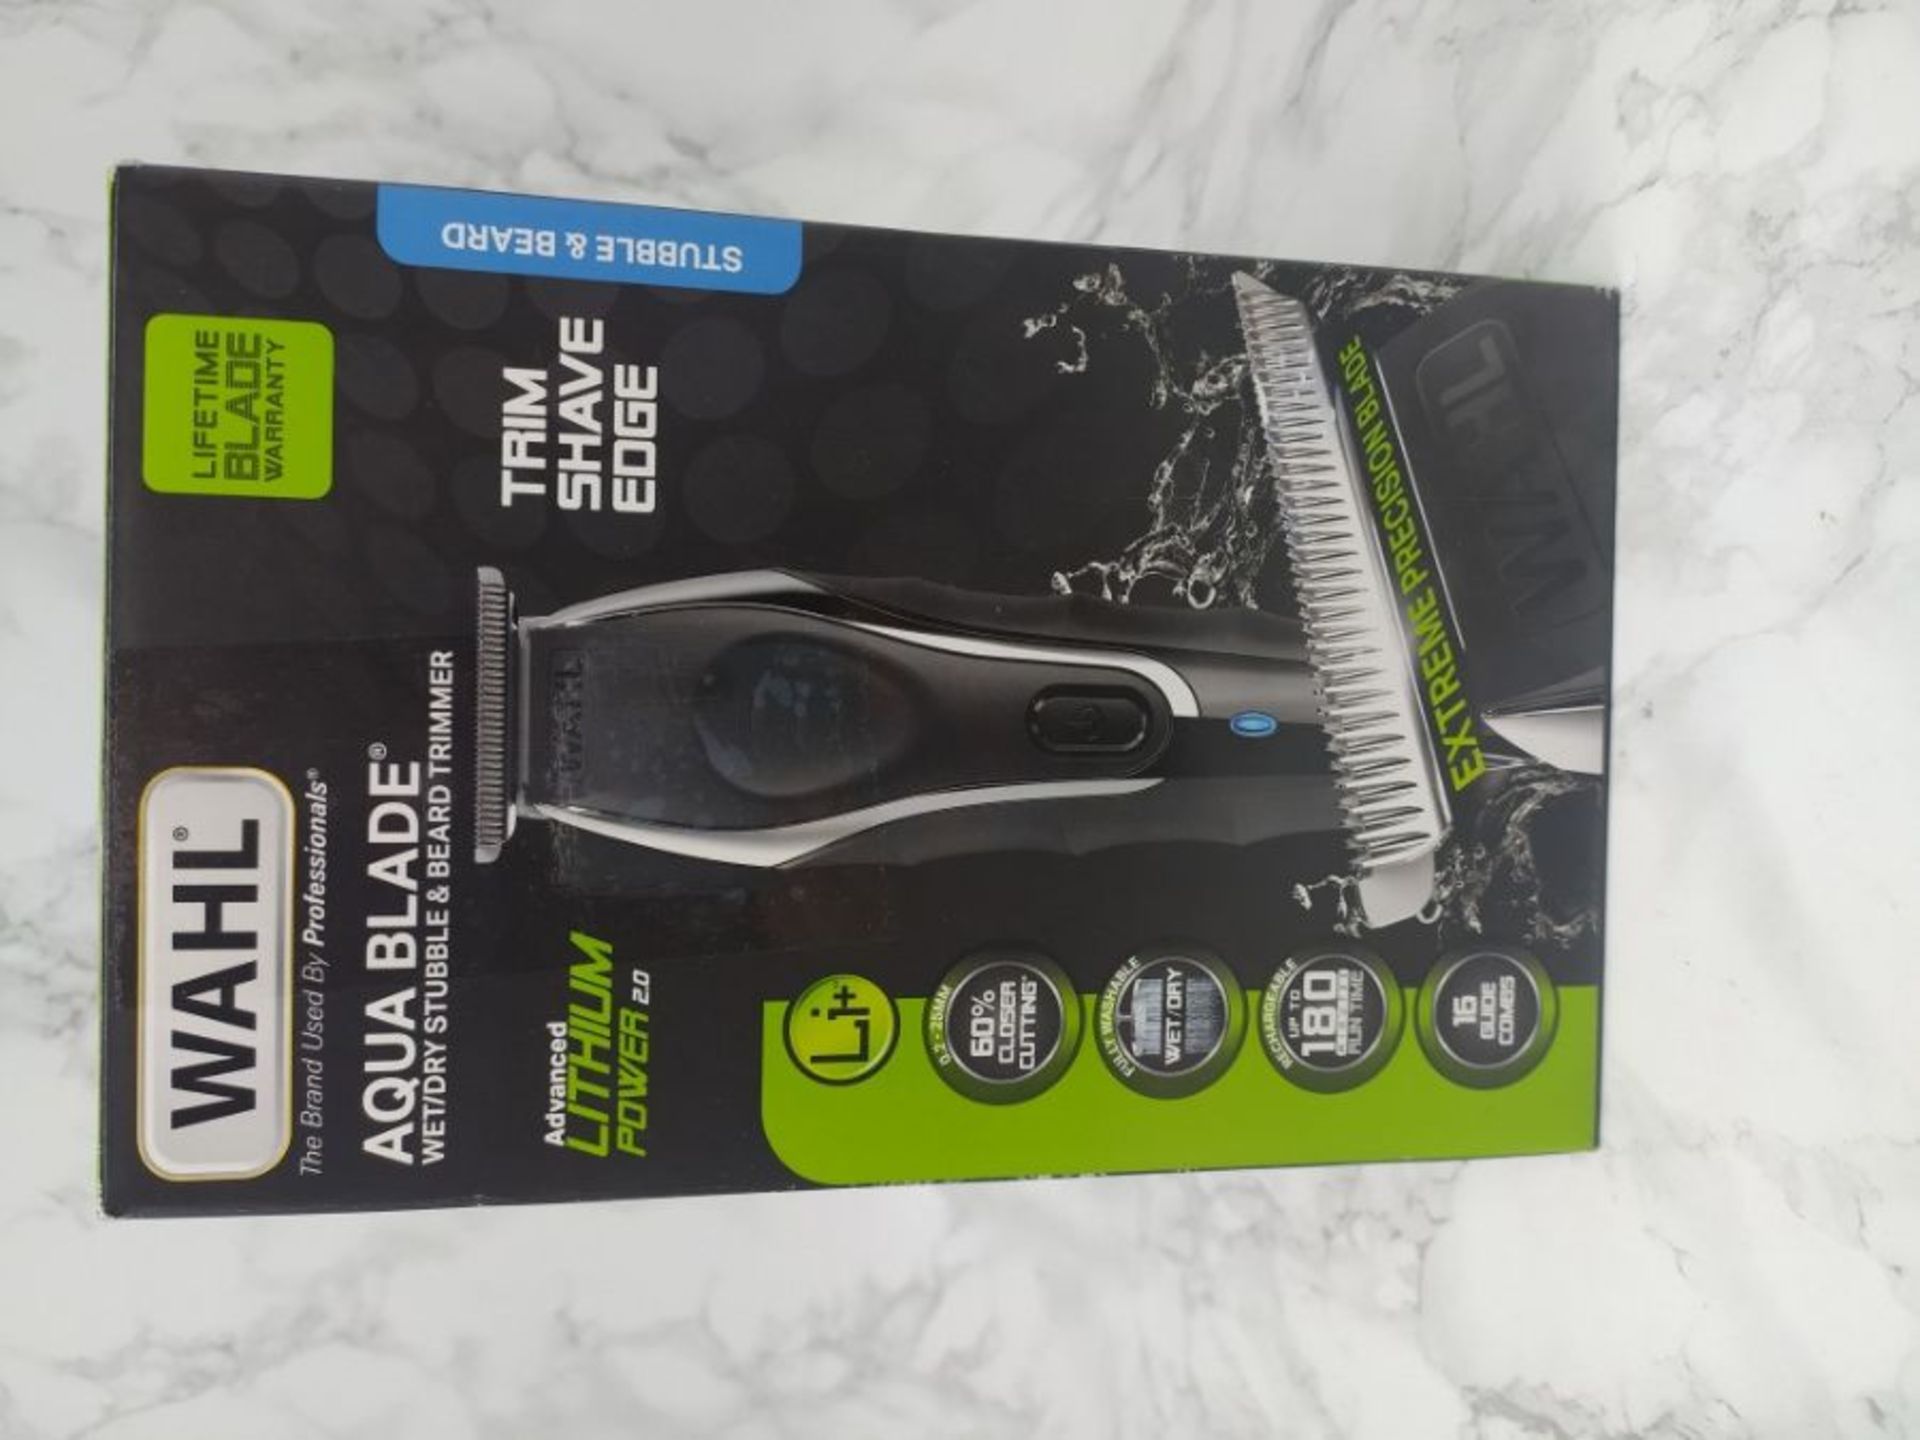 WAHL Beard Trimmer Men, Aqua Blade Hair Trimmers for Men, Stubble Trimmer, Male Groomi - Image 2 of 3